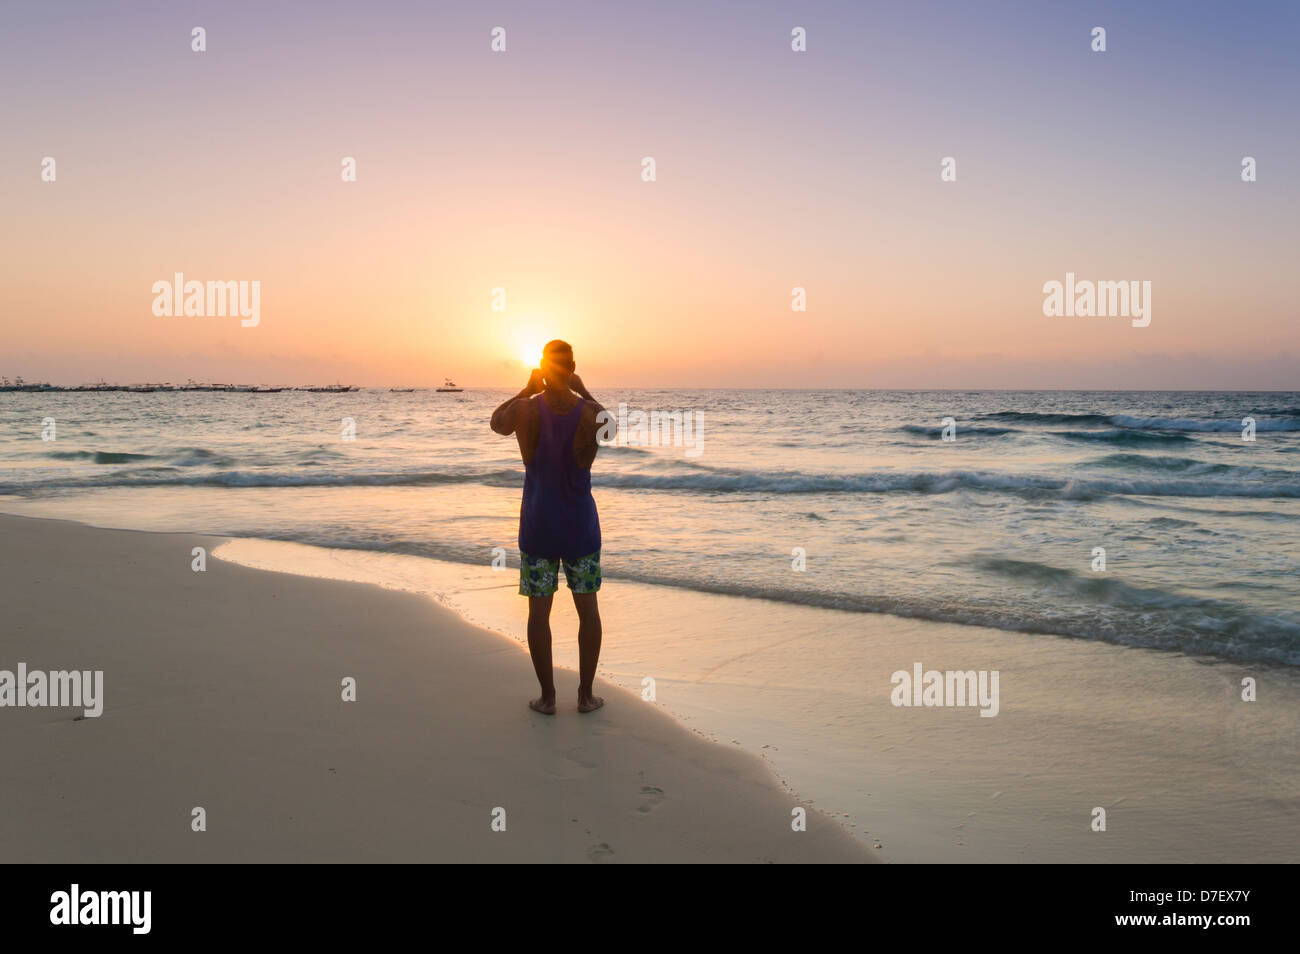 man standing on a beach in silhouette photographing  at sunrise Stock Photo